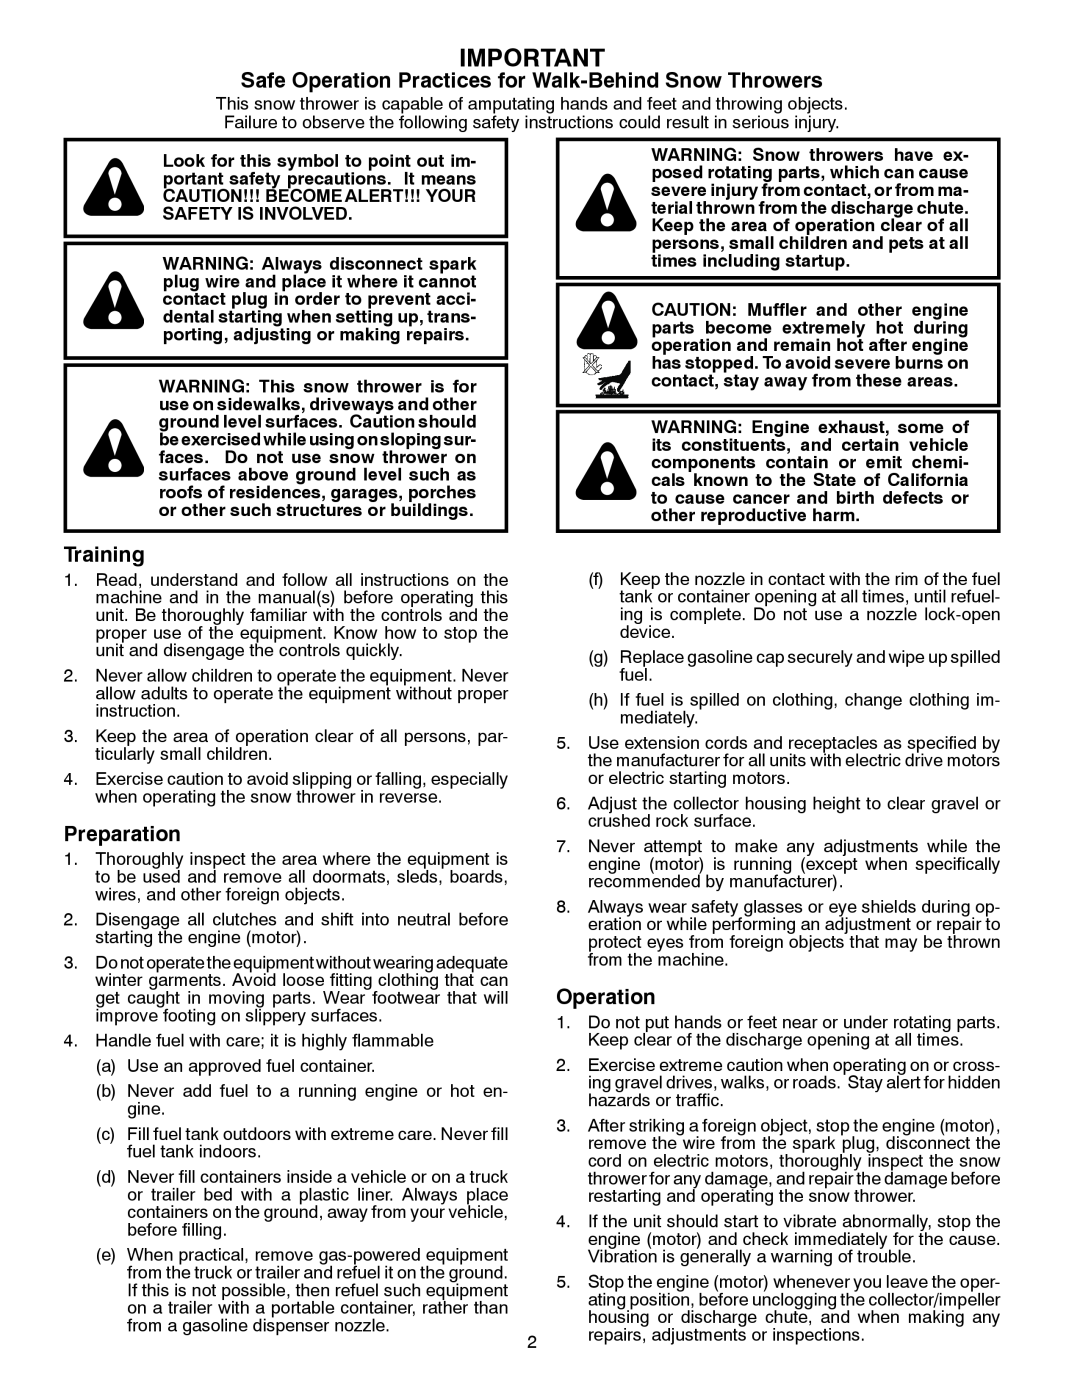 McCulloch 96192004100, MC627ES owner manual Safe Operation Practices for Walk-Behind Snow Throwers, Training, Preparation 